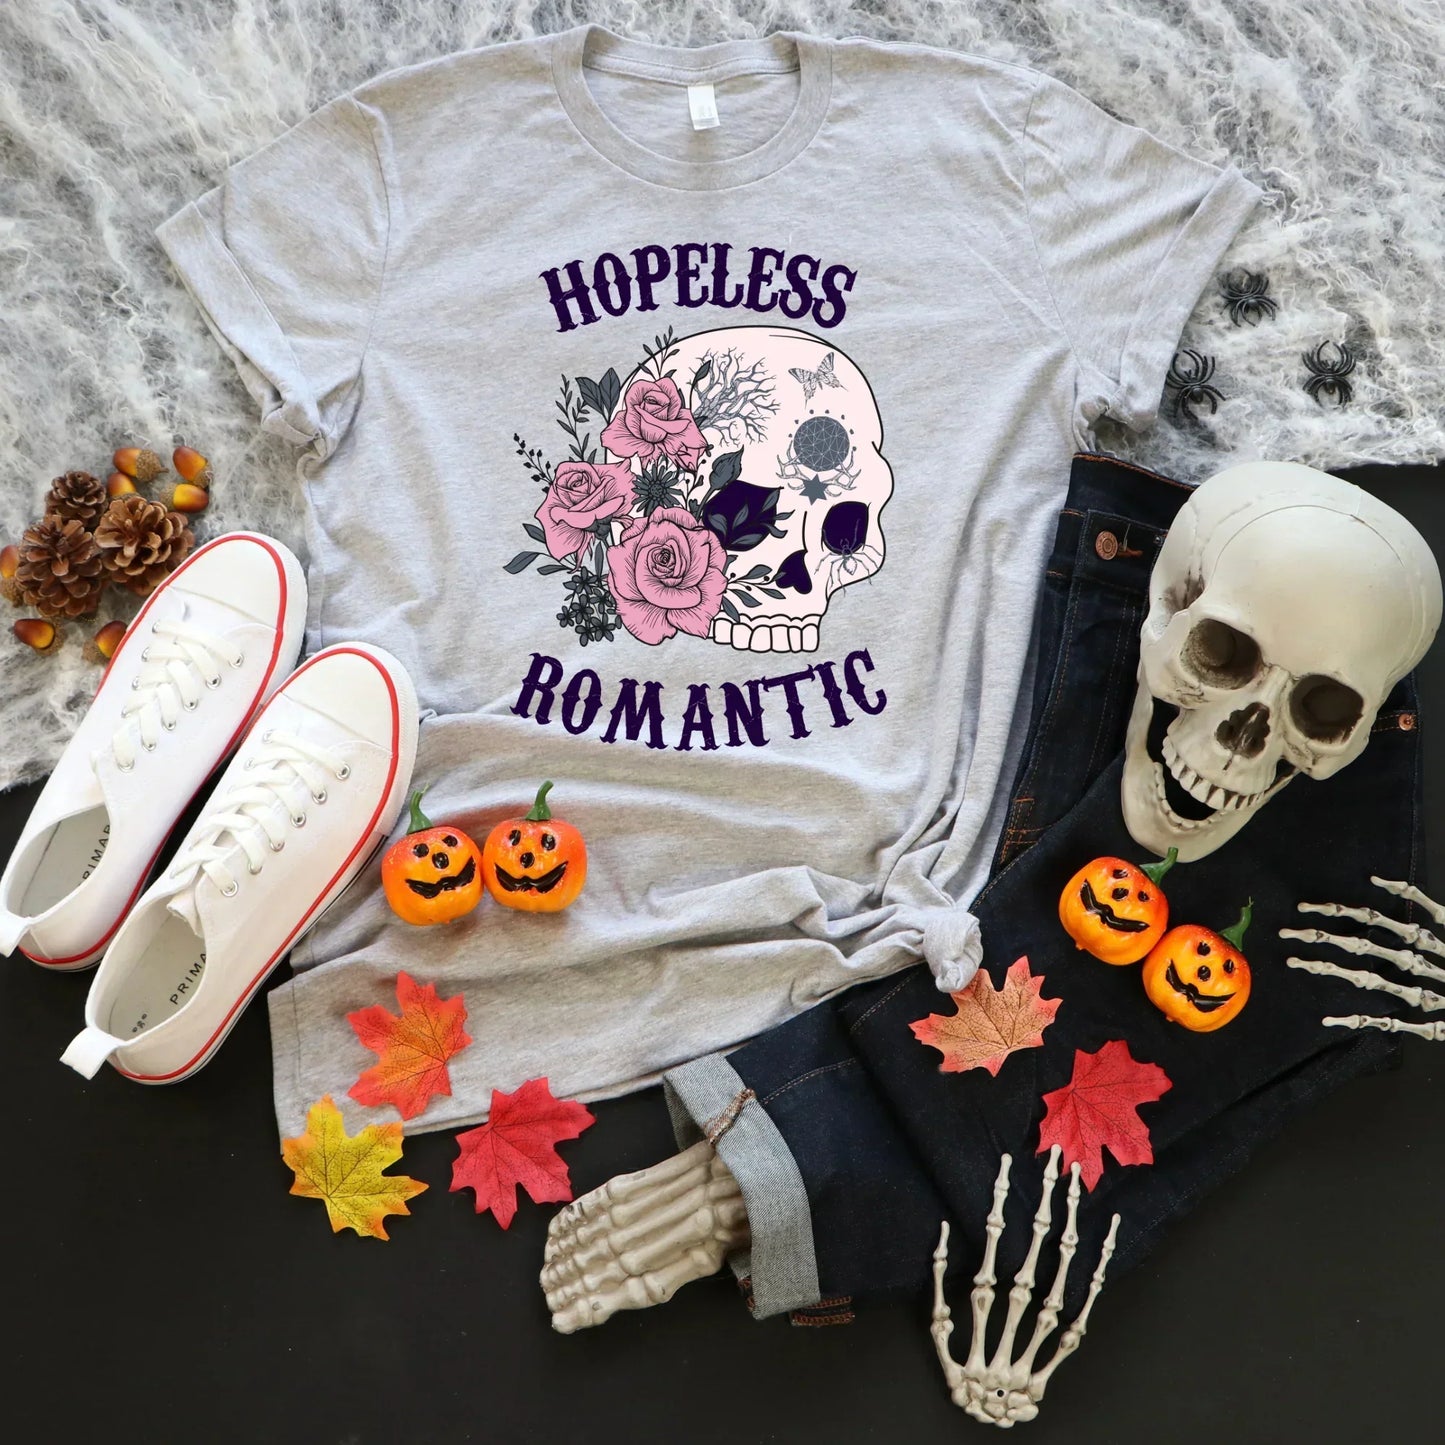 Hopeless Romantic Gothic Shirt, Halloween Sweatshirt, Witchy Vibes, Bats & Dead Roses Shirt, Moon Shirt, Magical Witch Shirt, Goth Style, Rot with Me, EMO Tee